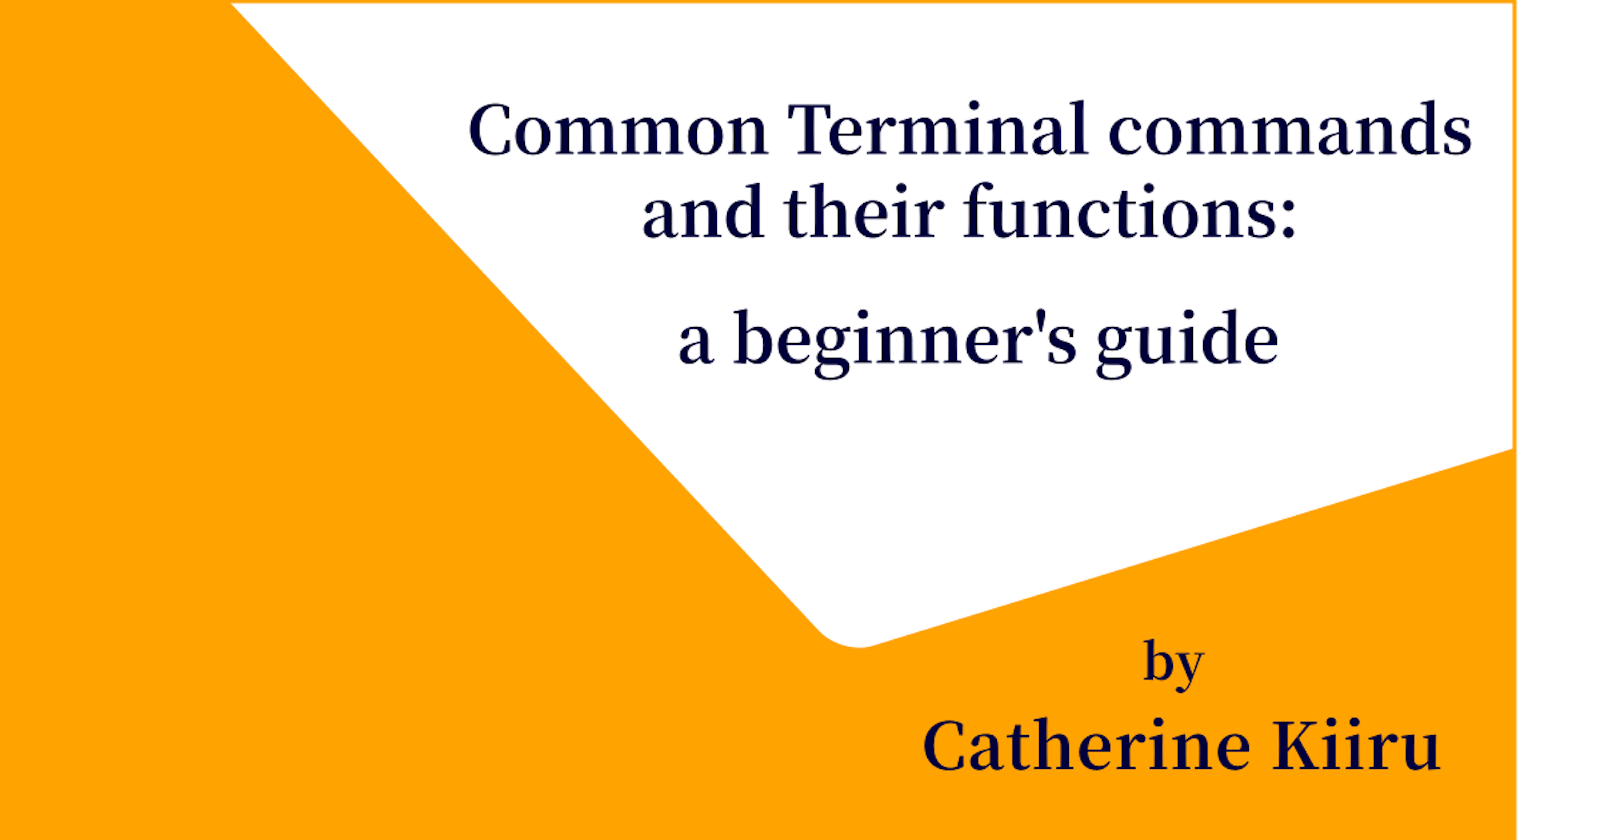 Common Terminal commands: a beginners guide